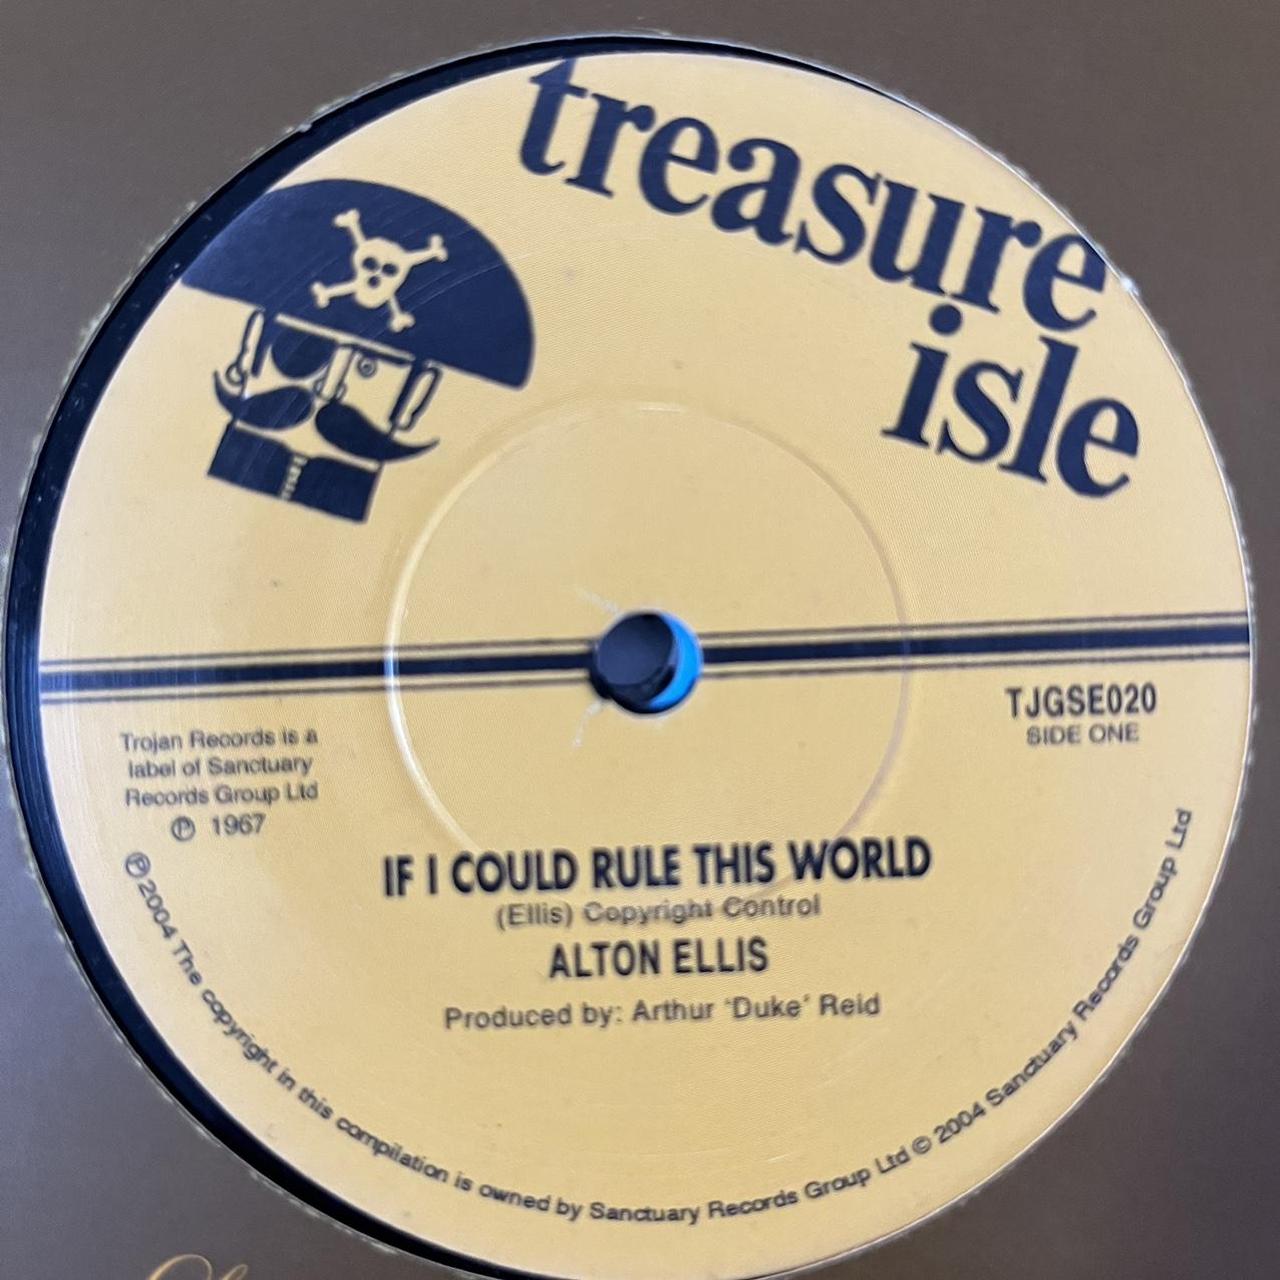 Alton Ellis “If I Could Rule The World” / “Why Did You Leave Me To Cry” 2 Track 7inch vinyl